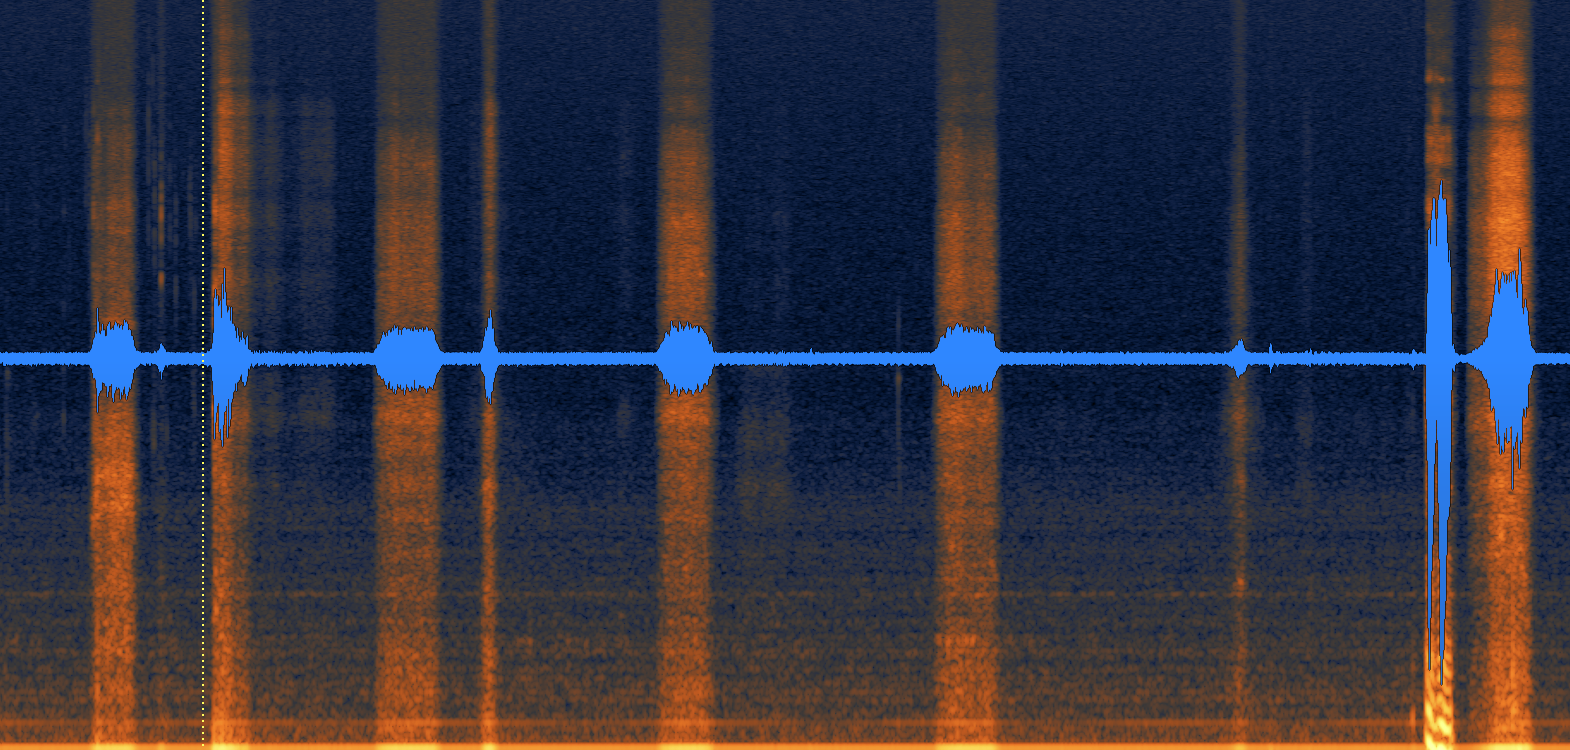 A close up of a waveform from a podcast recording showing little bumps in the audio where a breath likely happened.